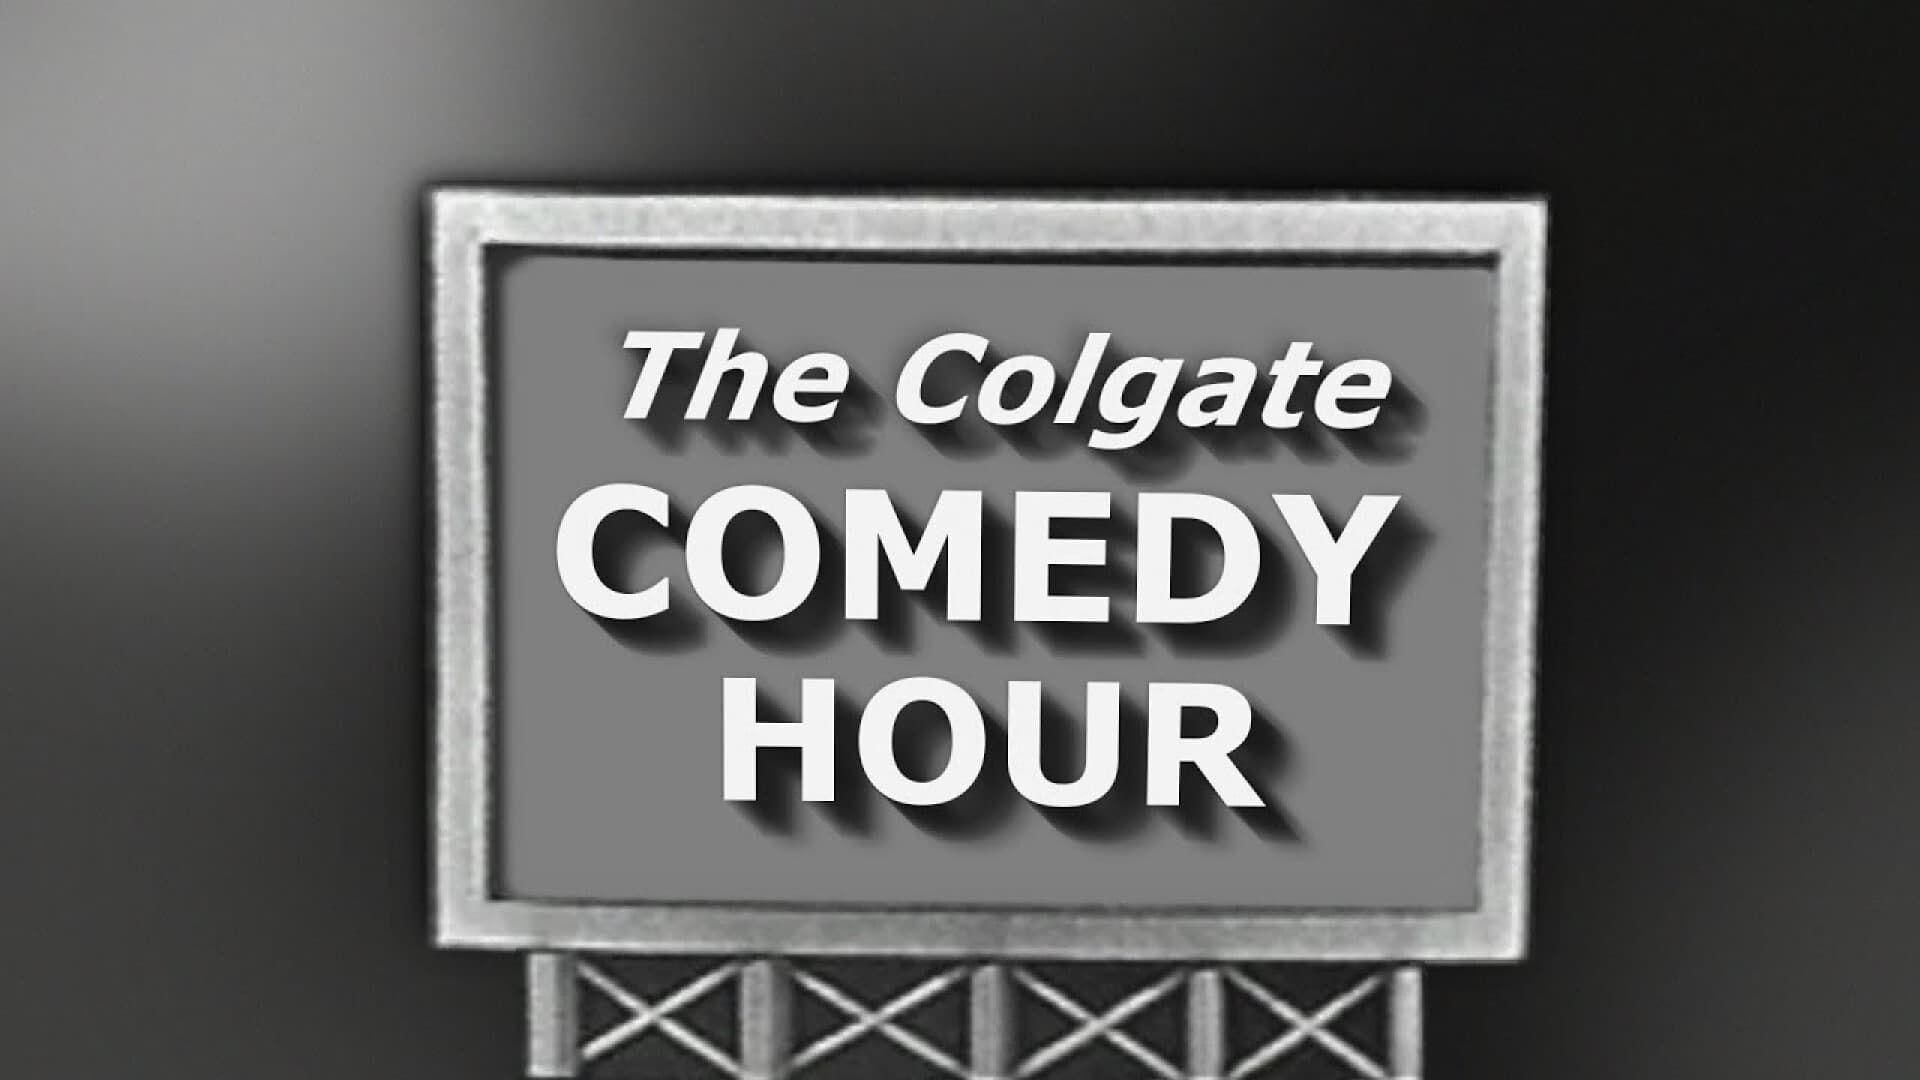 The Colgate Comedy Hour background